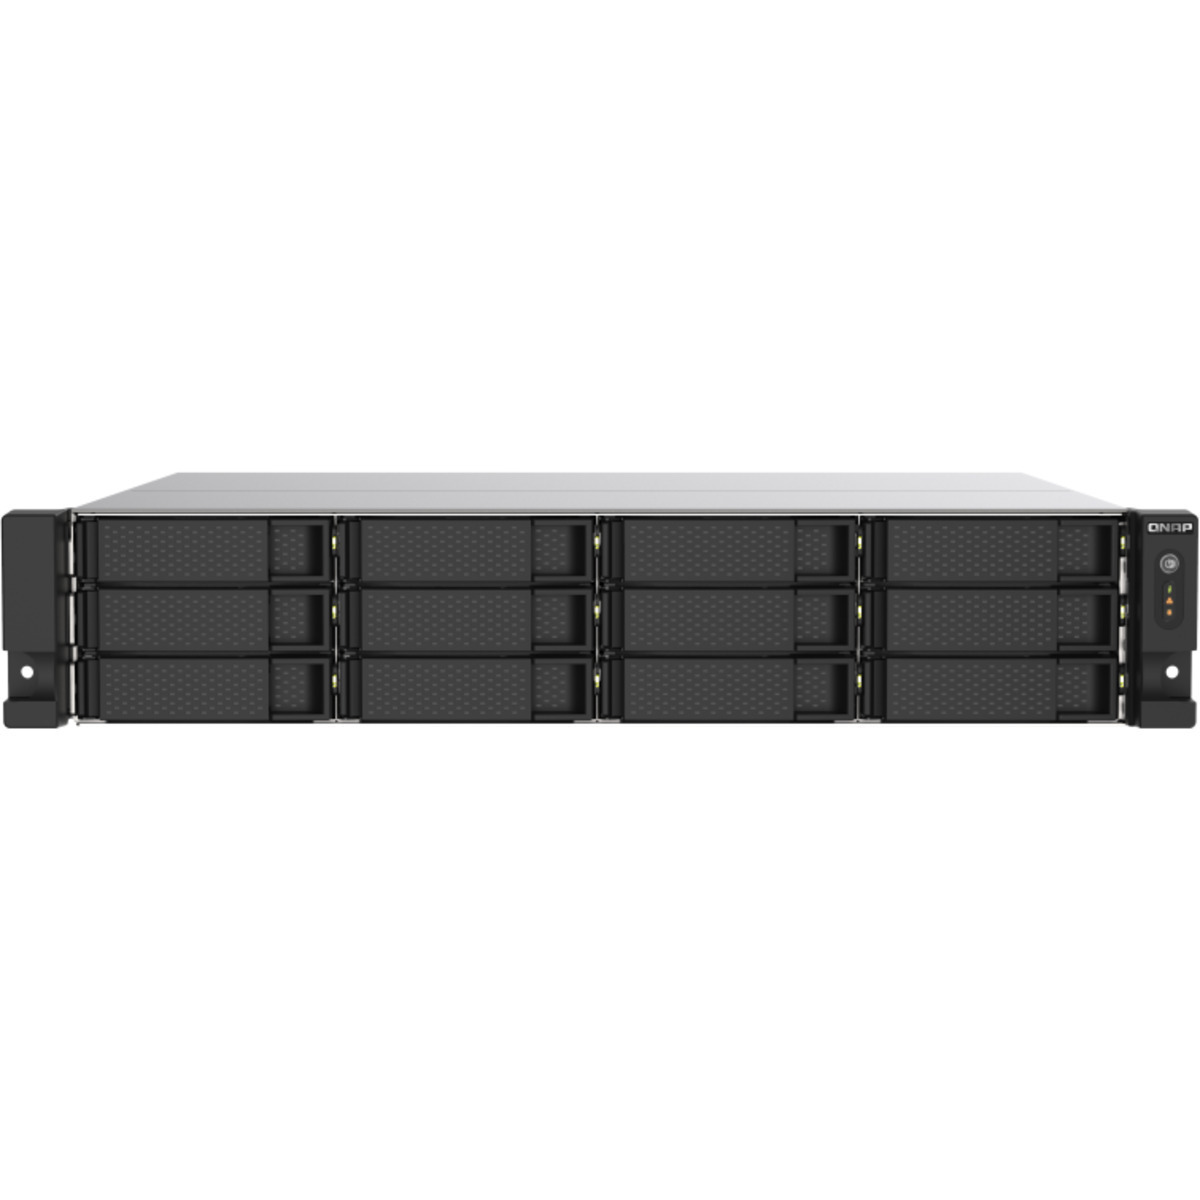 QNAP TS-1273AU-RP 48tb 12-Bay RackMount Multimedia / Power User / Business NAS - Network Attached Storage Device 8x6tb Western Digital Red Pro WD6005FFBX 3.5 7200rpm SATA 6Gb/s HDD NAS Class Drives Installed - Burn-In Tested - FREE RAM UPGRADE TS-1273AU-RP